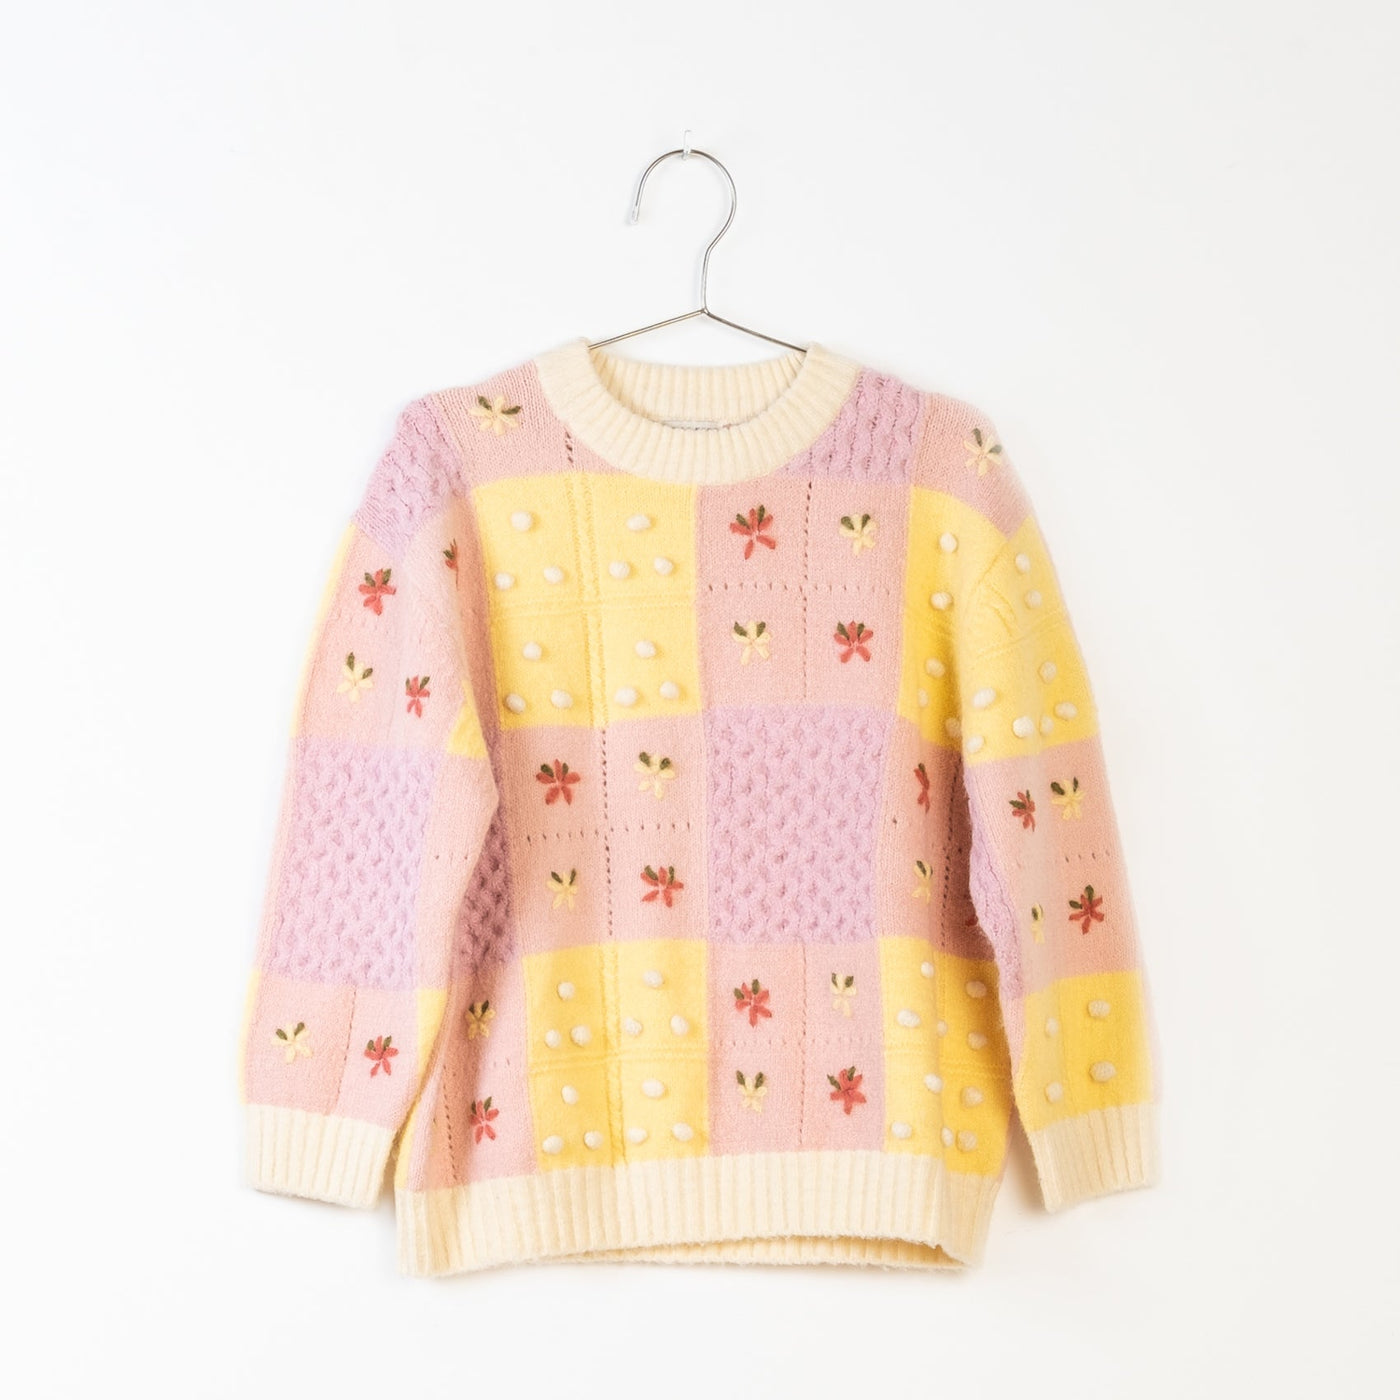 Patchwork Sweater by Fish & Kids - Petite Belle